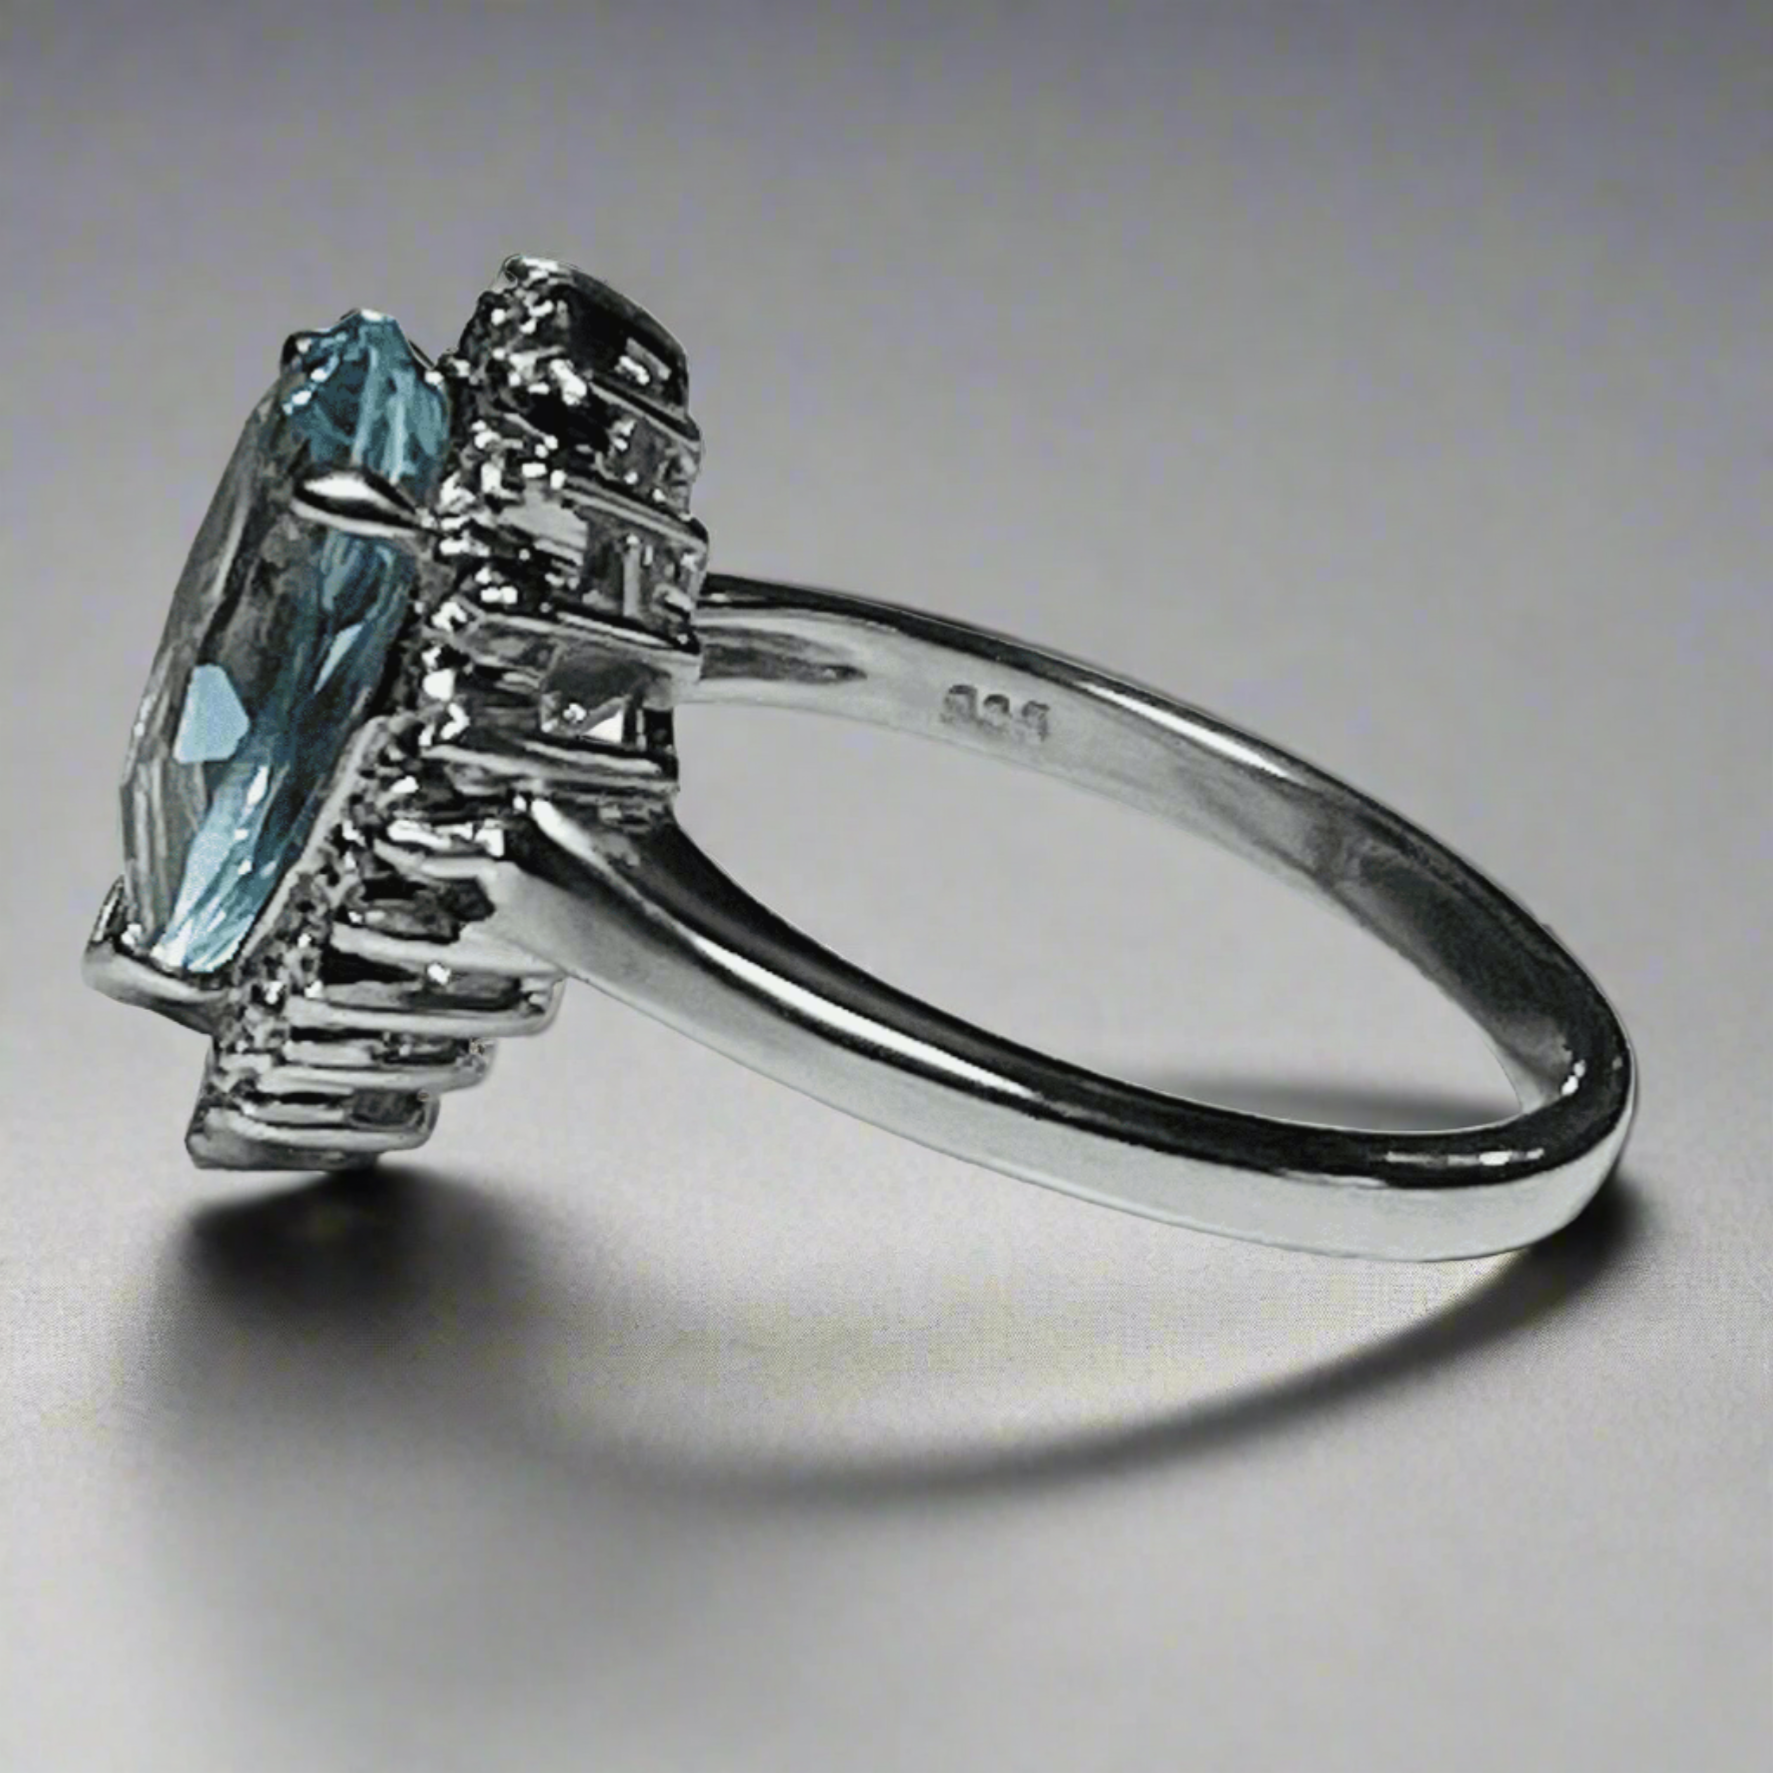 Large pear shaped blue topaz and diamond sterling silver cluster ring